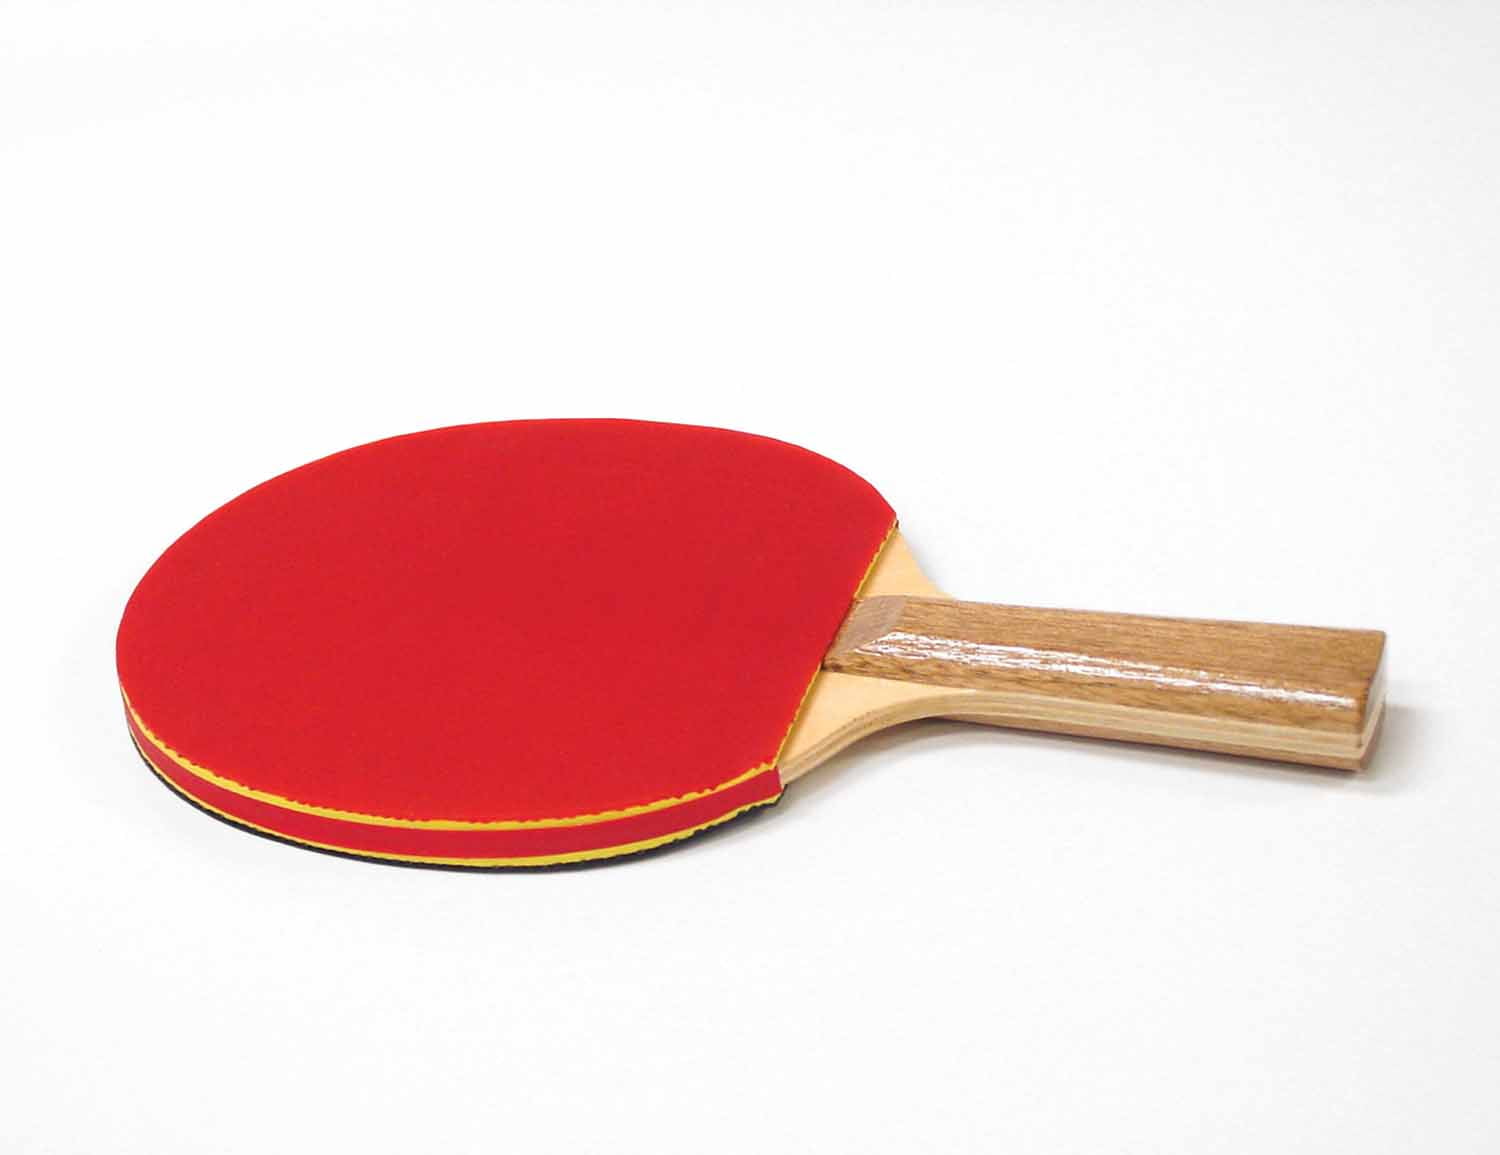 EastPoint EPS 2.0 Table Tennis Ping Pong Paddle 815419012137 for sale online 